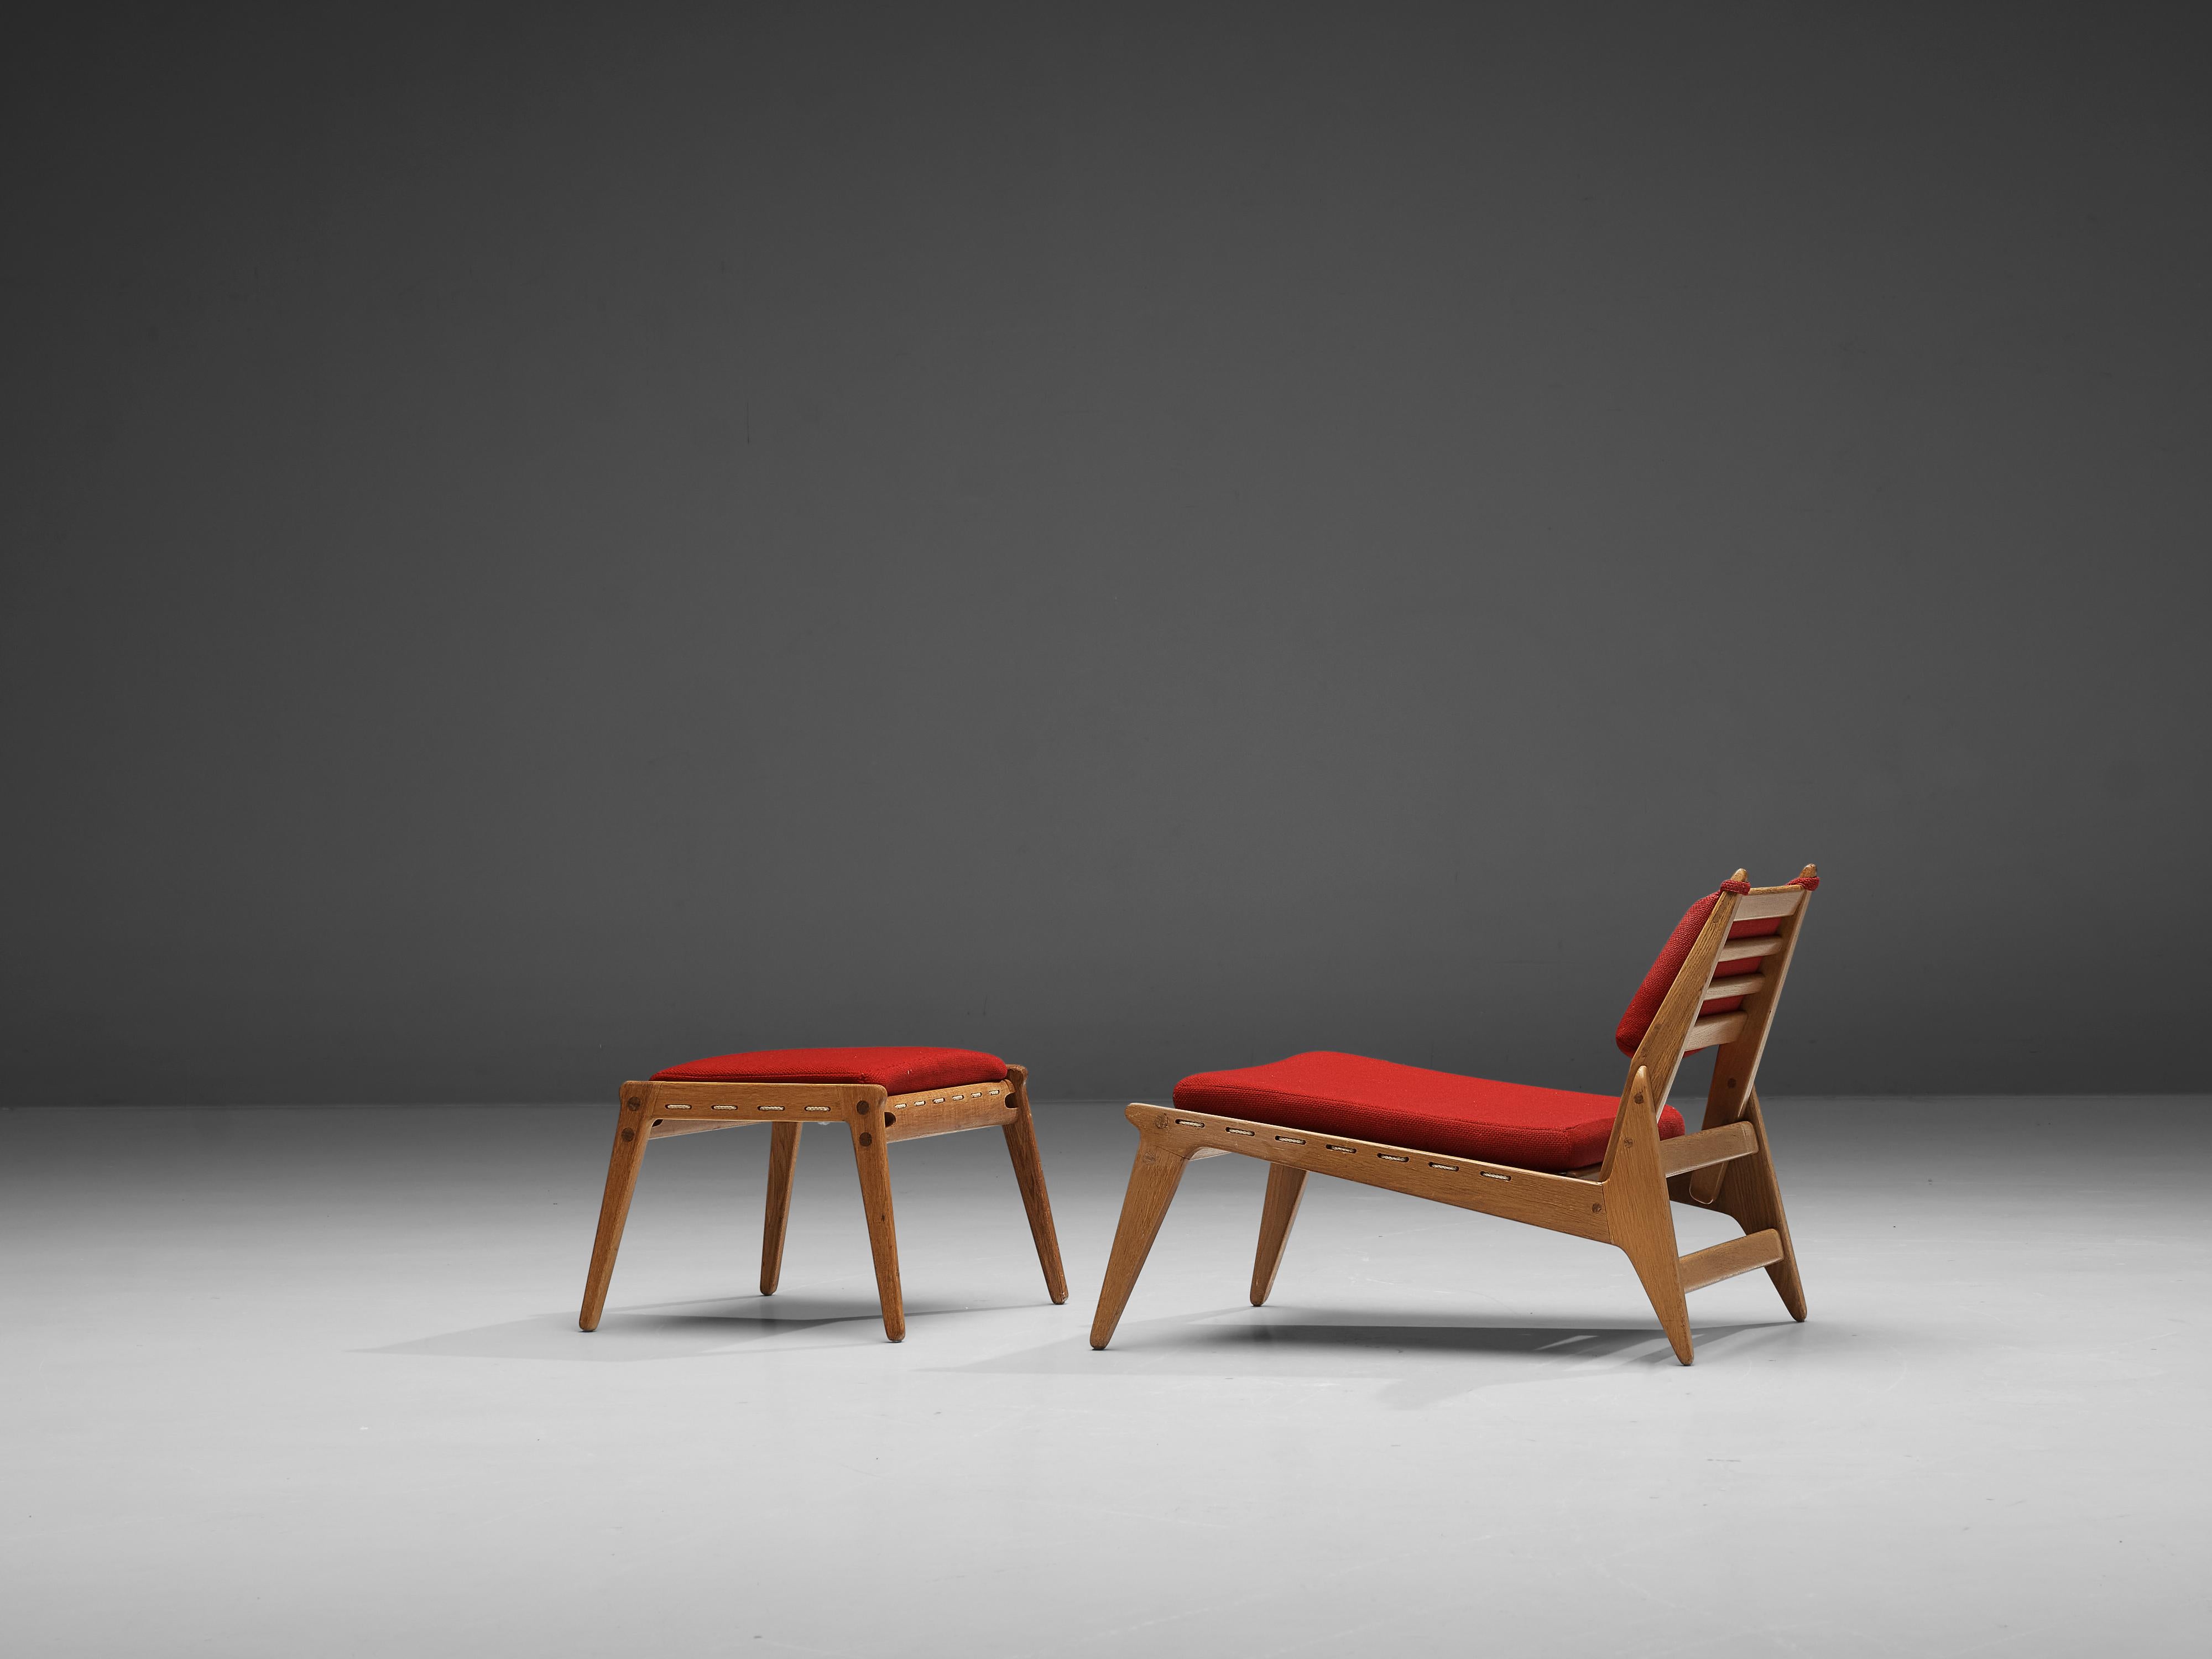 Lounge chair with ottoman, oak, rope, fabric, Germany, 1950s

This relaxing chair shows a minimal design combined with great woodworking. An open character is created by the high legs and back. Besides the wood-joints the lace seating is nicely